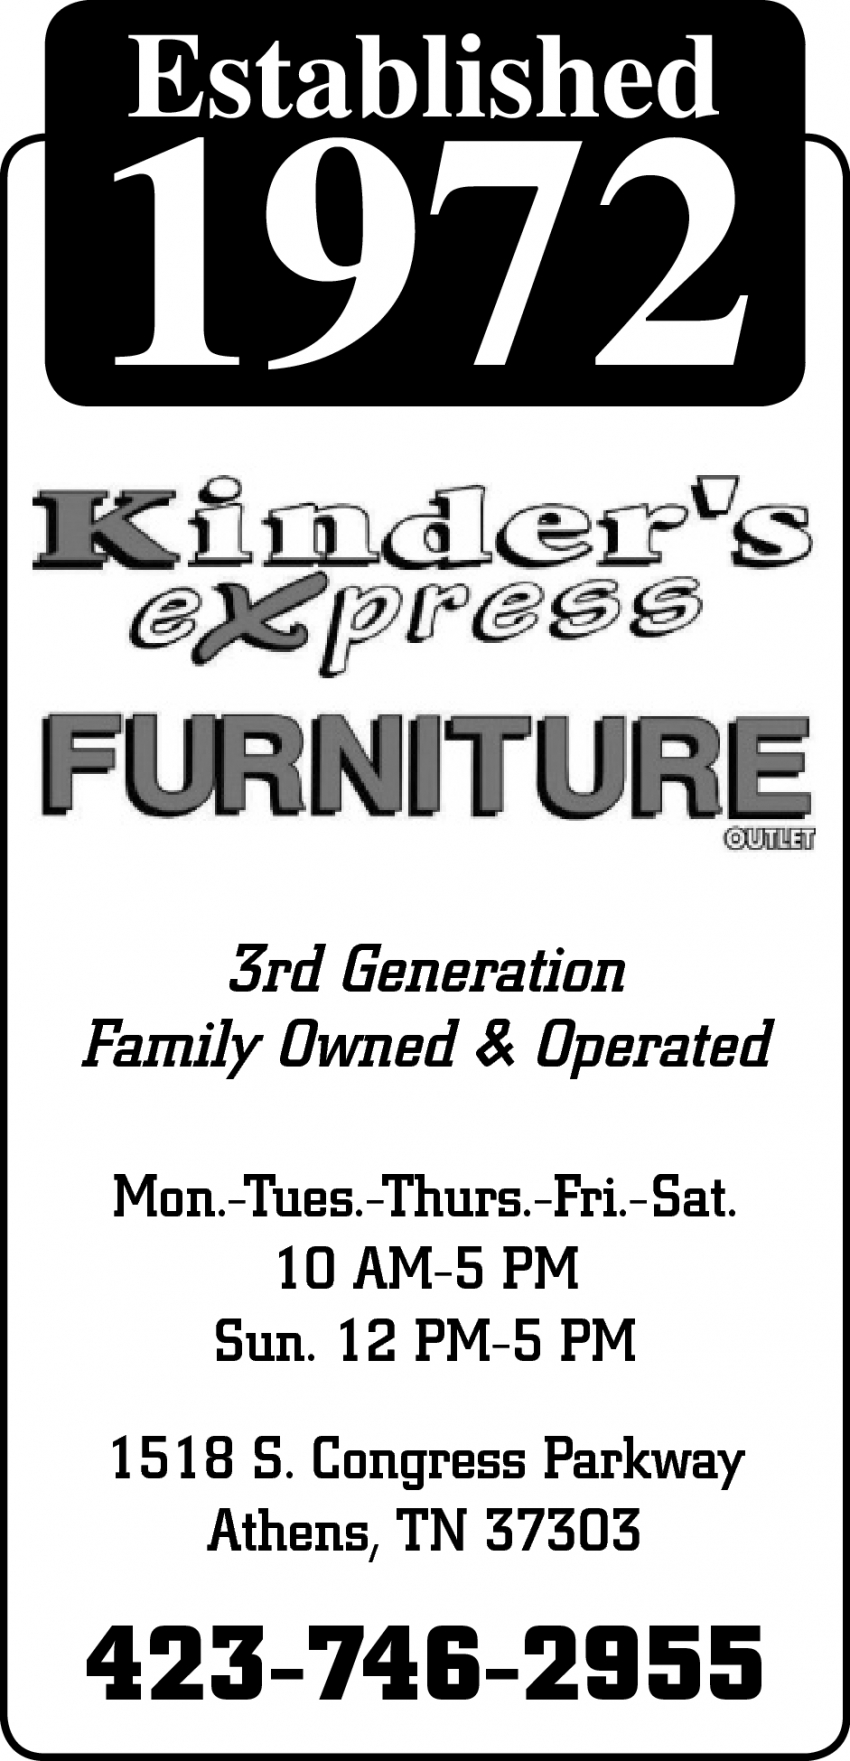 3rd Generation Family Owned & Operated